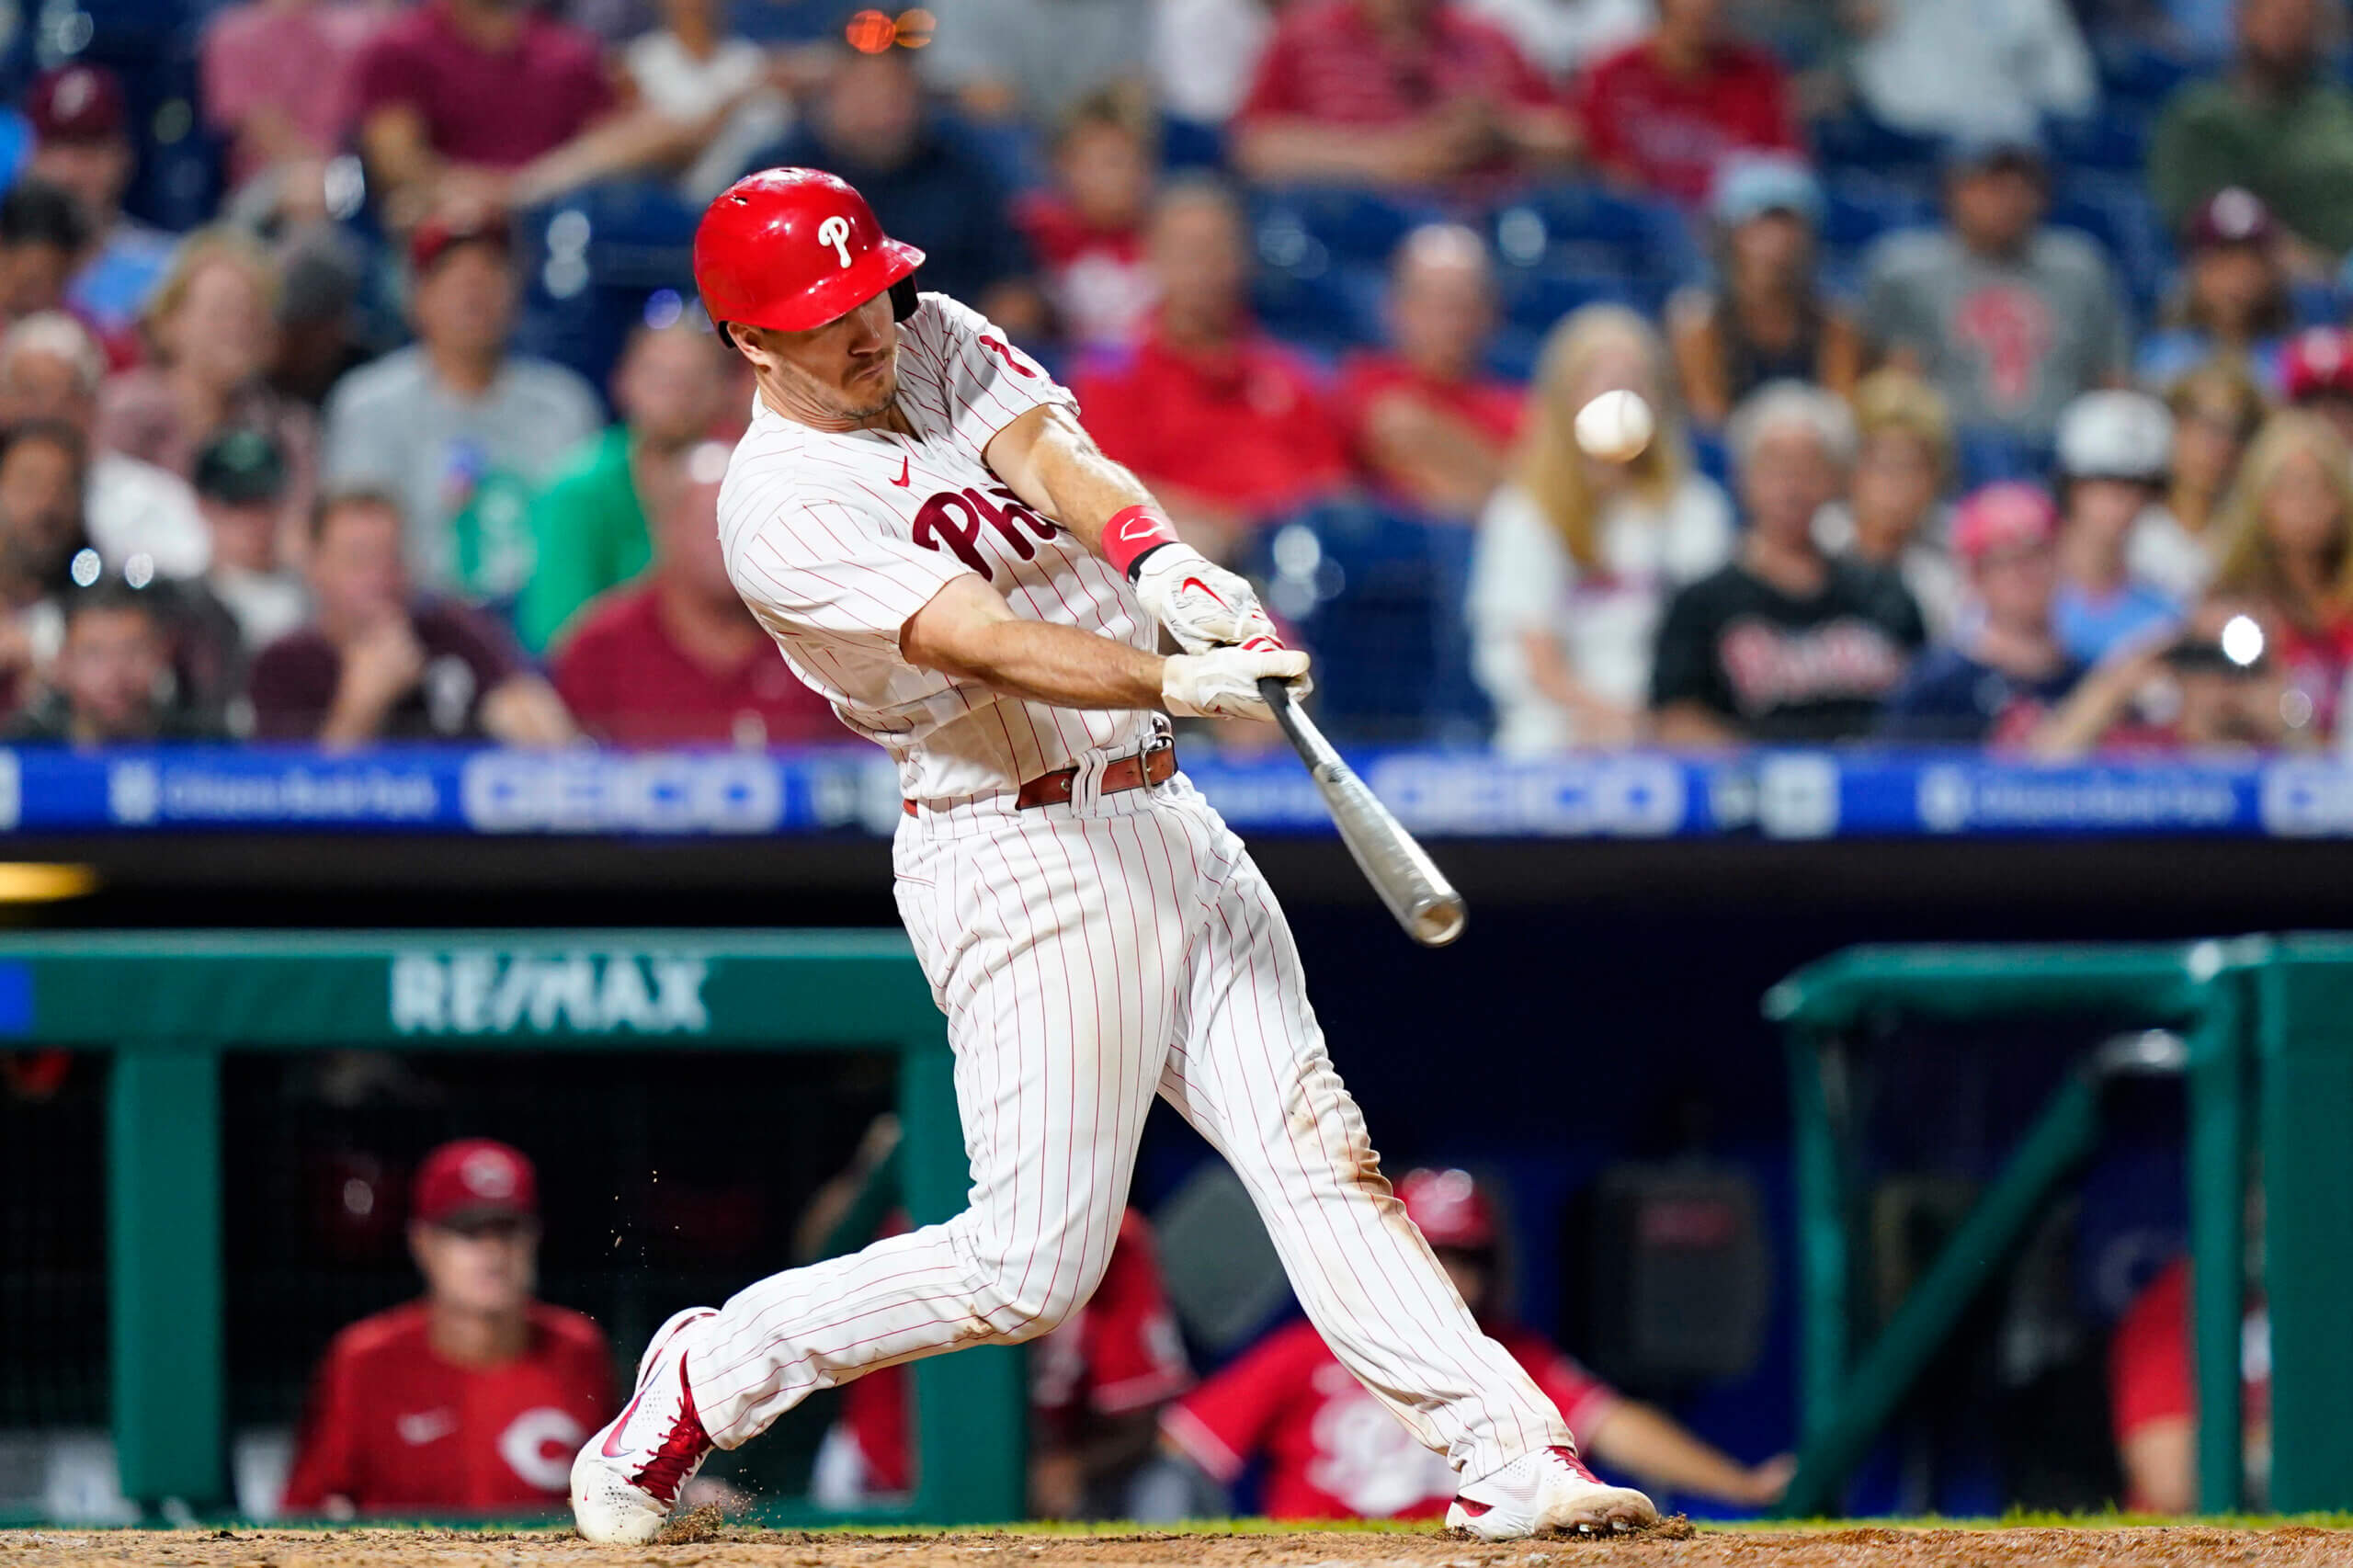 MLB: Phillies star Realmuto missing Blue Jays series over vaccine